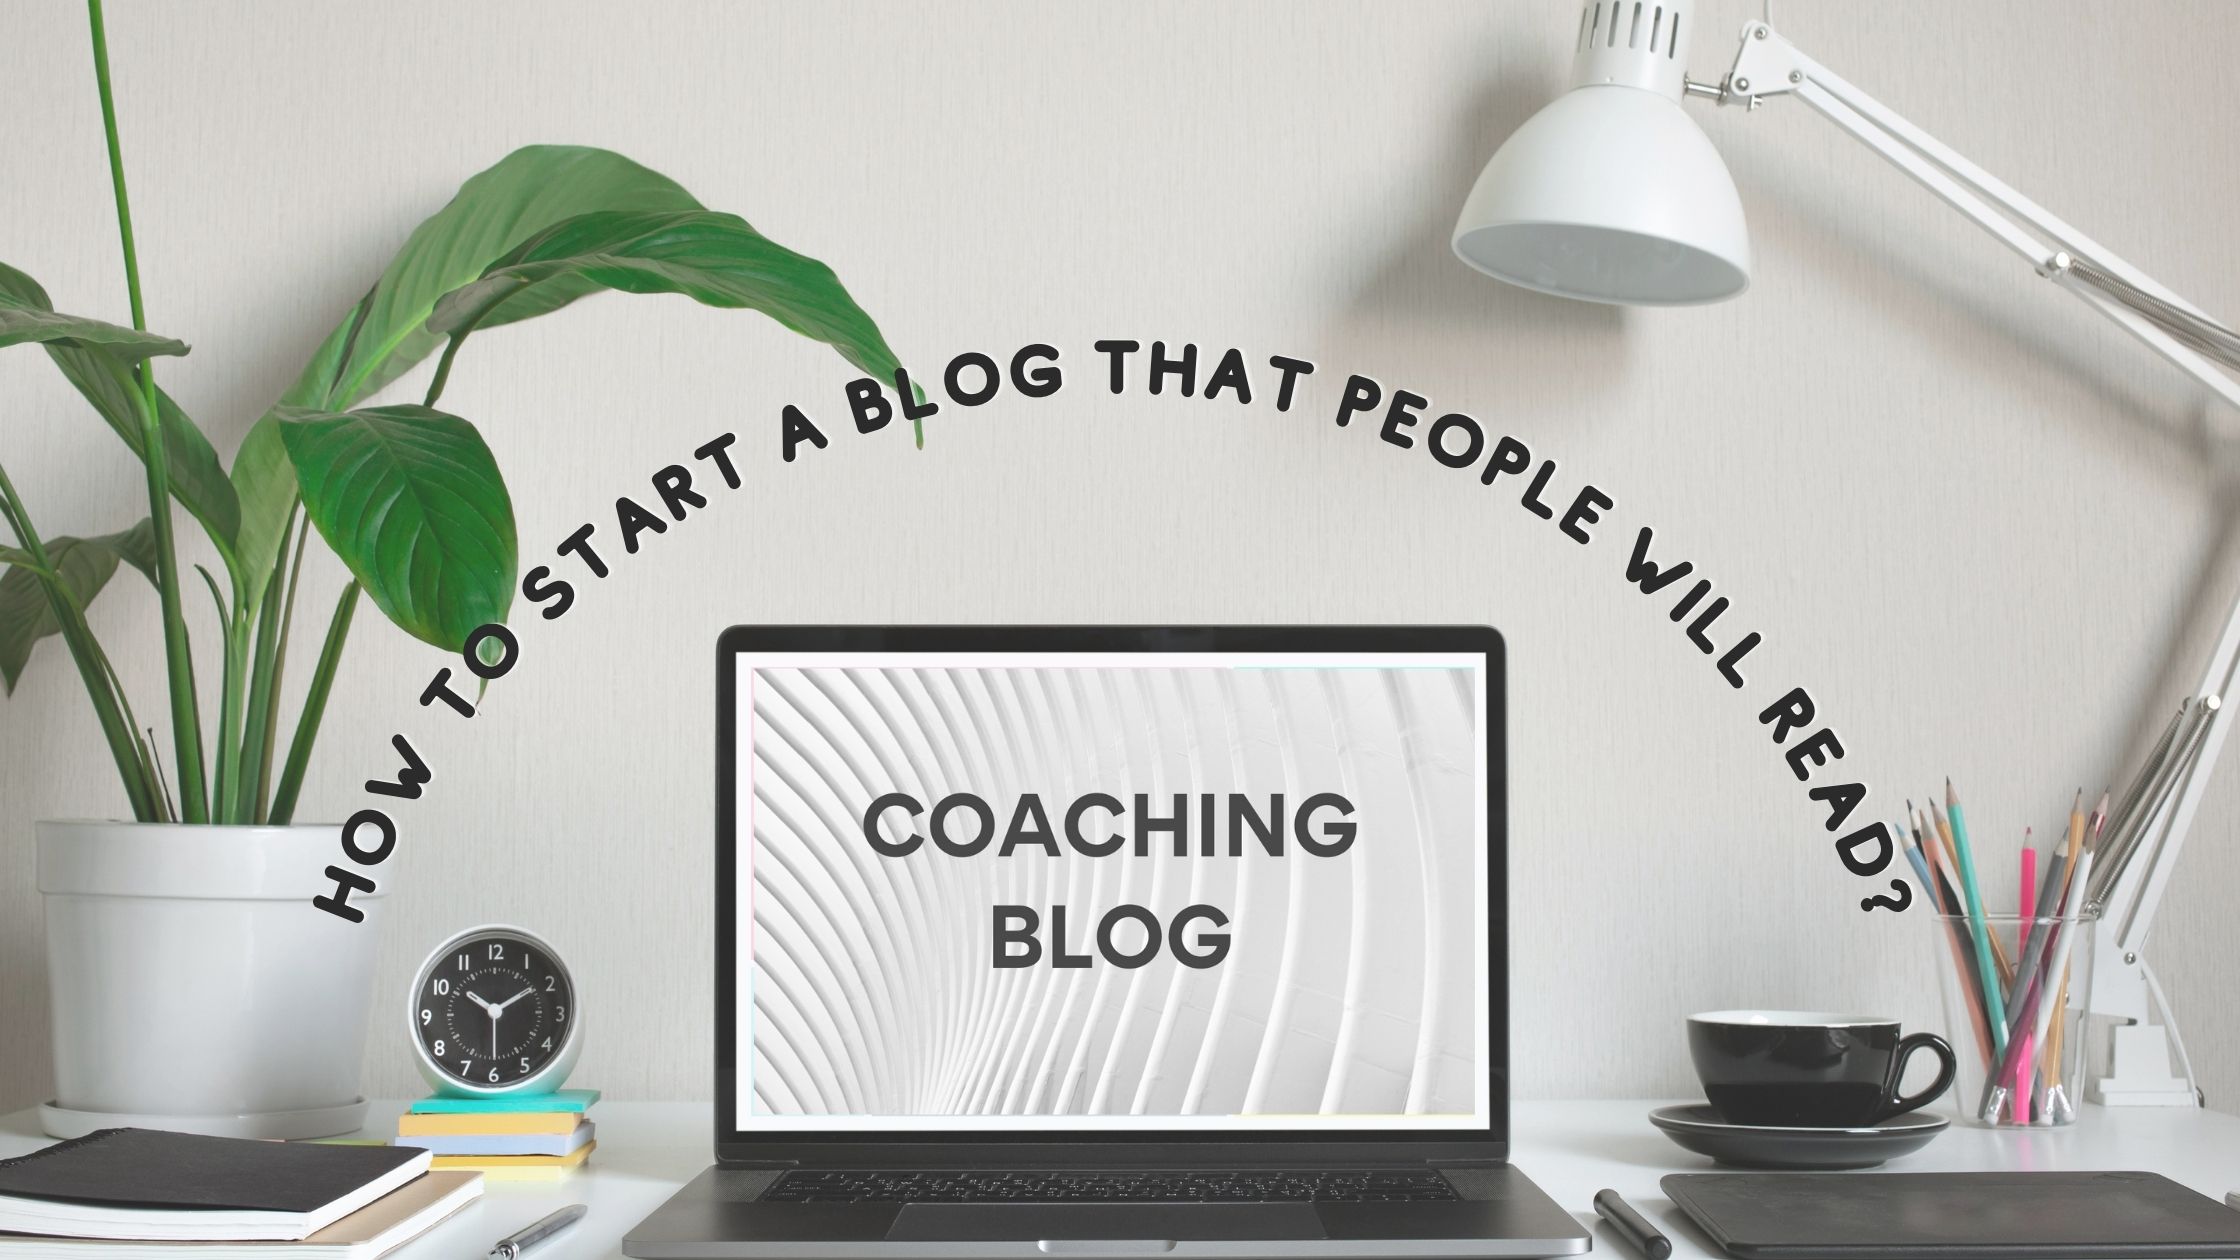 coaching blog how to start a blog that people will read